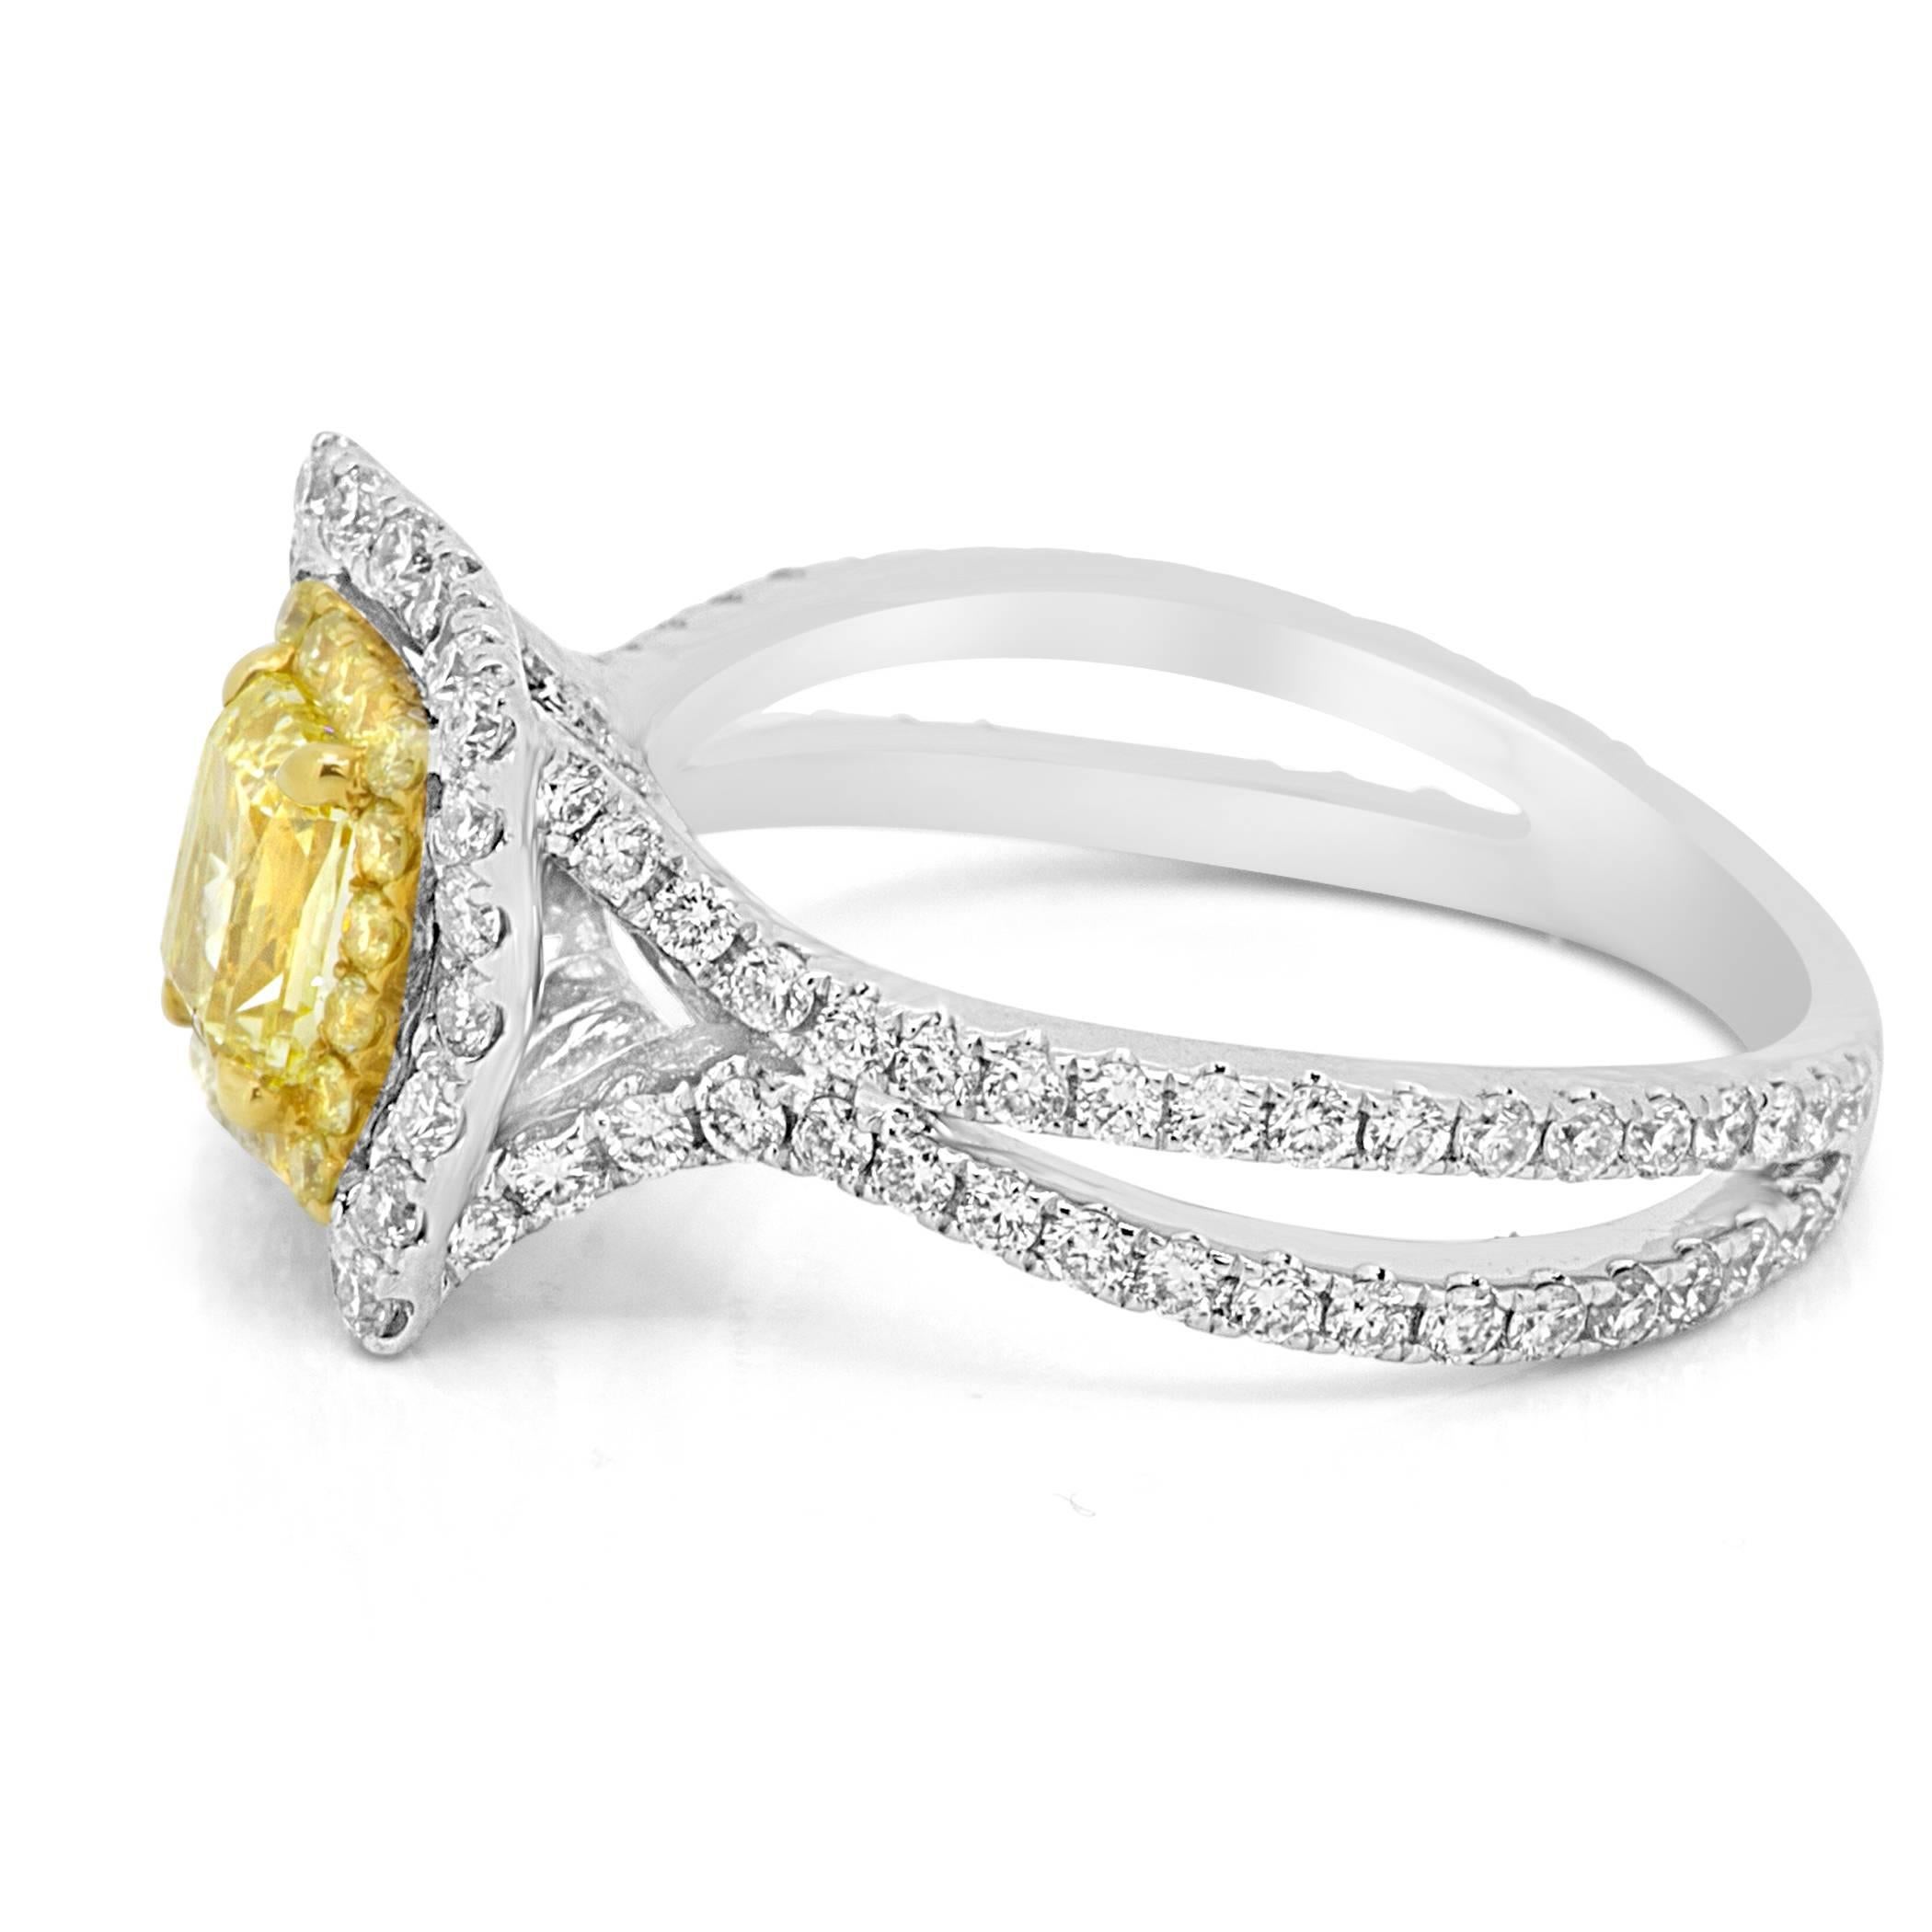 GIA Certified  Natural Fancy Yellow VS2 Radiant  1.00 Carat in double Halo of natural fancy yellow round 0.17 Carat and white diamond round 1.00 Carat. In split prong 18K White and Yellow Gold ring Bridal Fashion Cocktail Ring.

Style available in